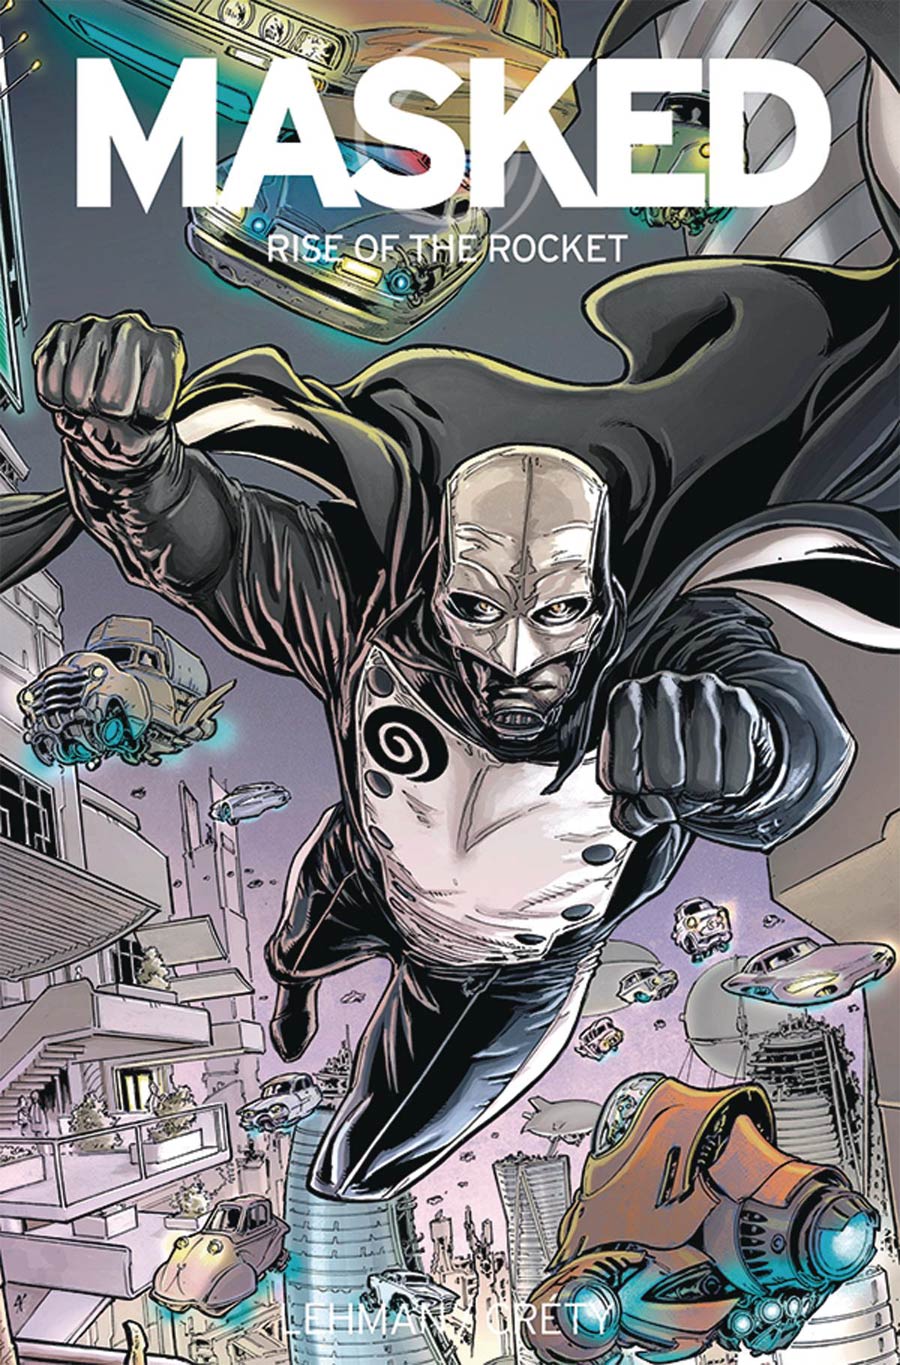 Masked Vol 2 Rise Of The Rocket GN